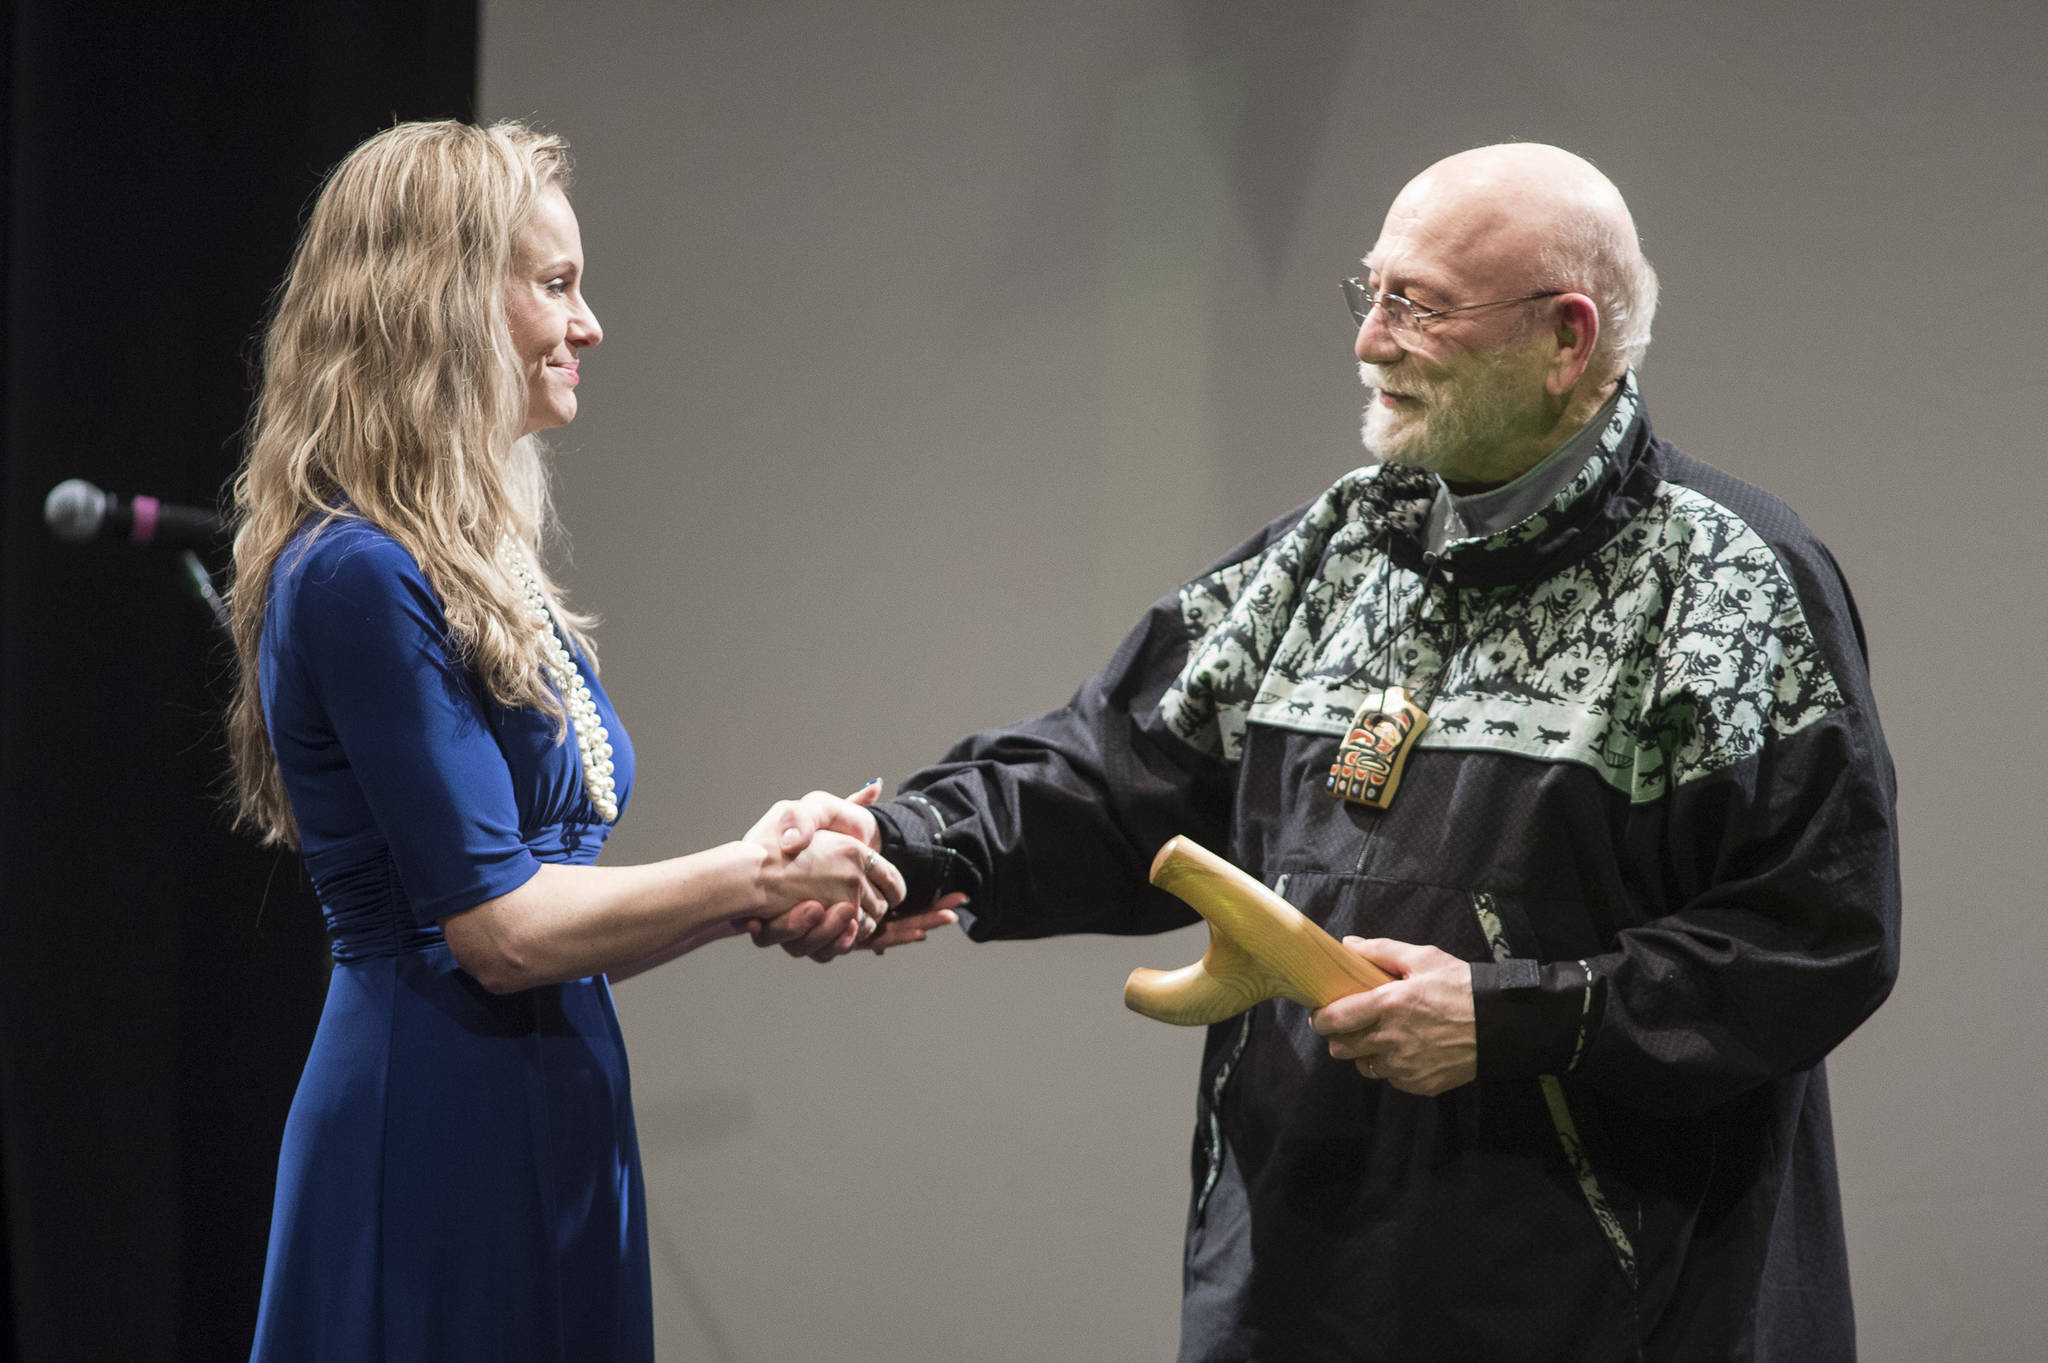 Jon Van Zyle, of Eagle River, receives his Individual Artist Award from Kelly Tshibaka, Commissioner of the Department of Administration, at the 2019 Governor’s Arts and Humanities Awards at the Juneau Arts & Culture Center on Thursday, Feb. 7, 2019. (Michael Penn | Juneau Empire)